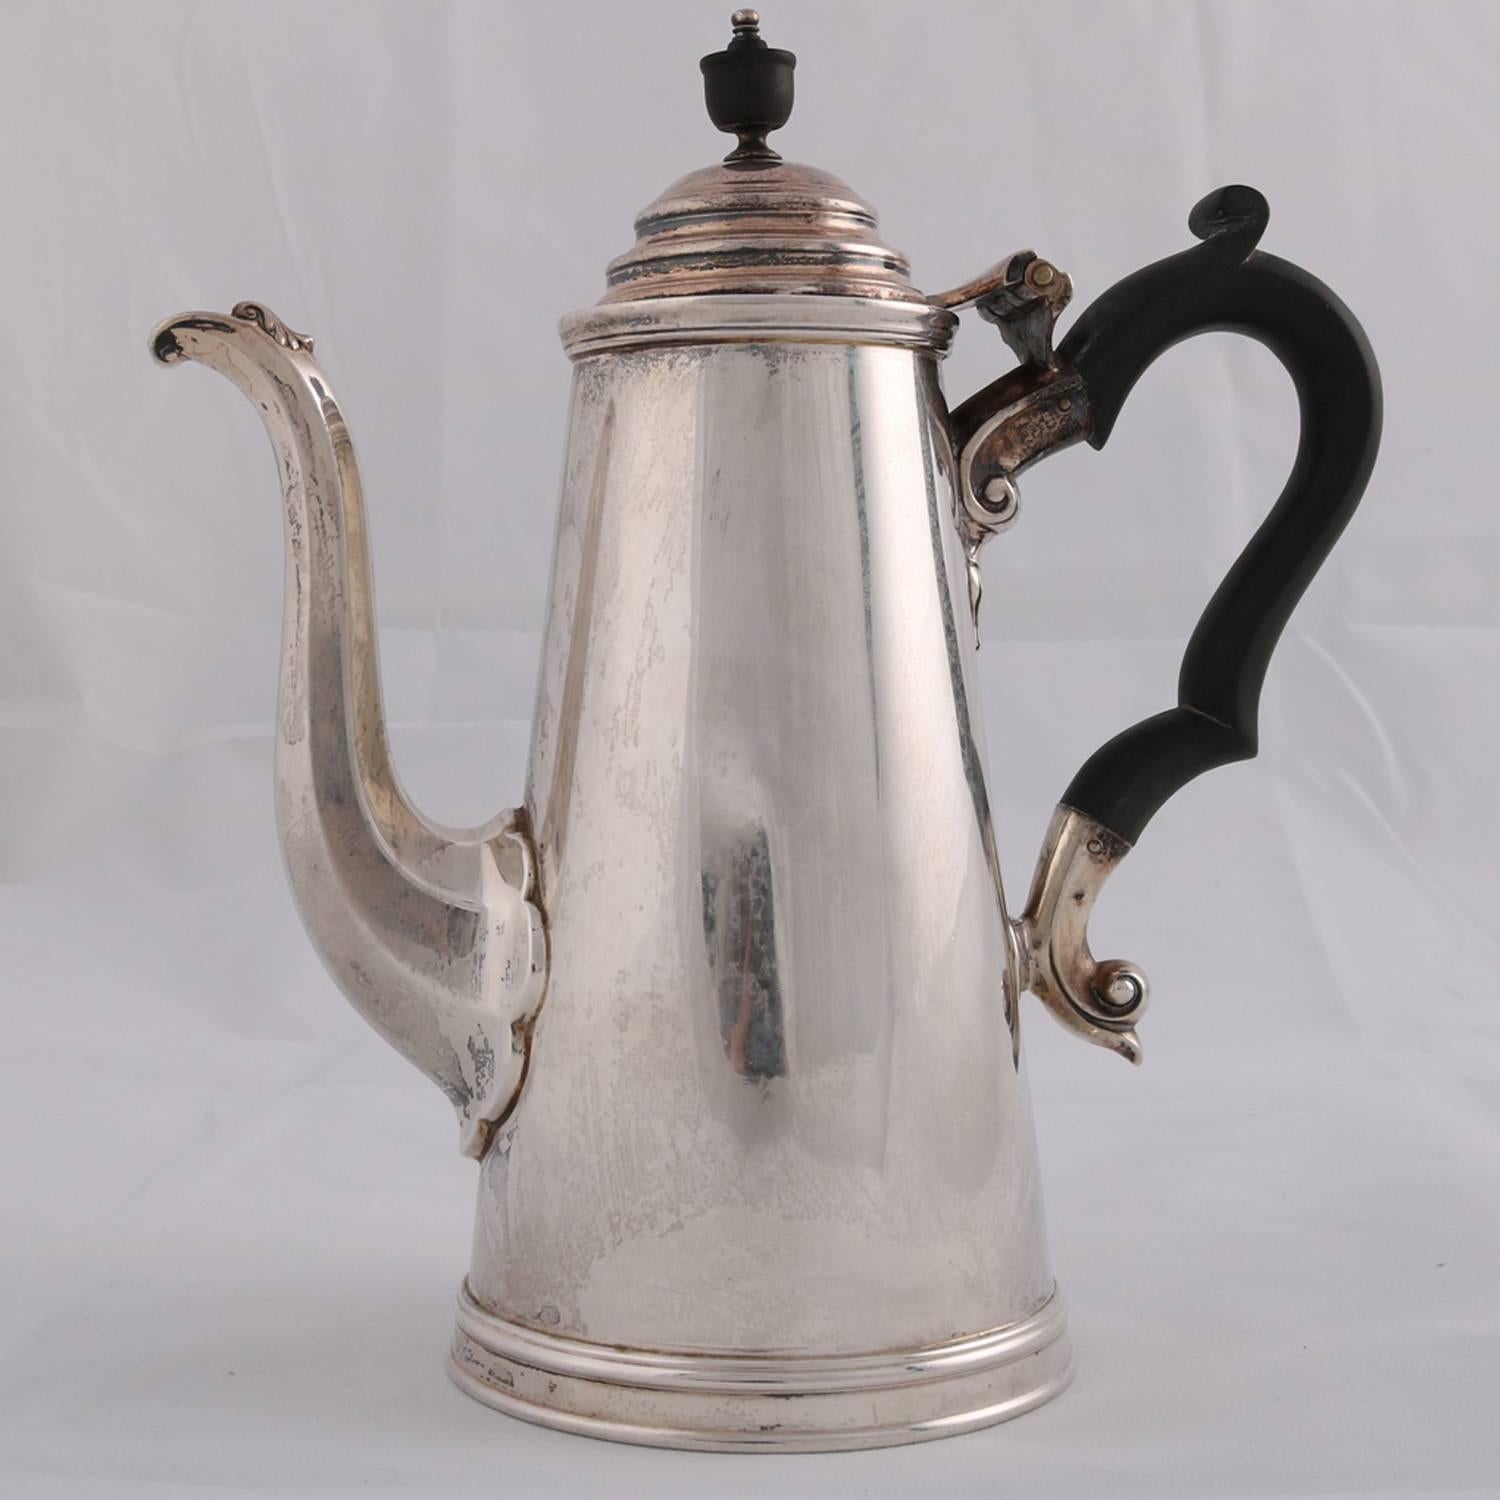 English sterling silver tea pot by James Dixon & Sons features simple and plain tapered cylinder form on stepped collet foot with hinged dome lid having carved finial, flanked by paneled swan neck spout and carved scroll form wood handle, British